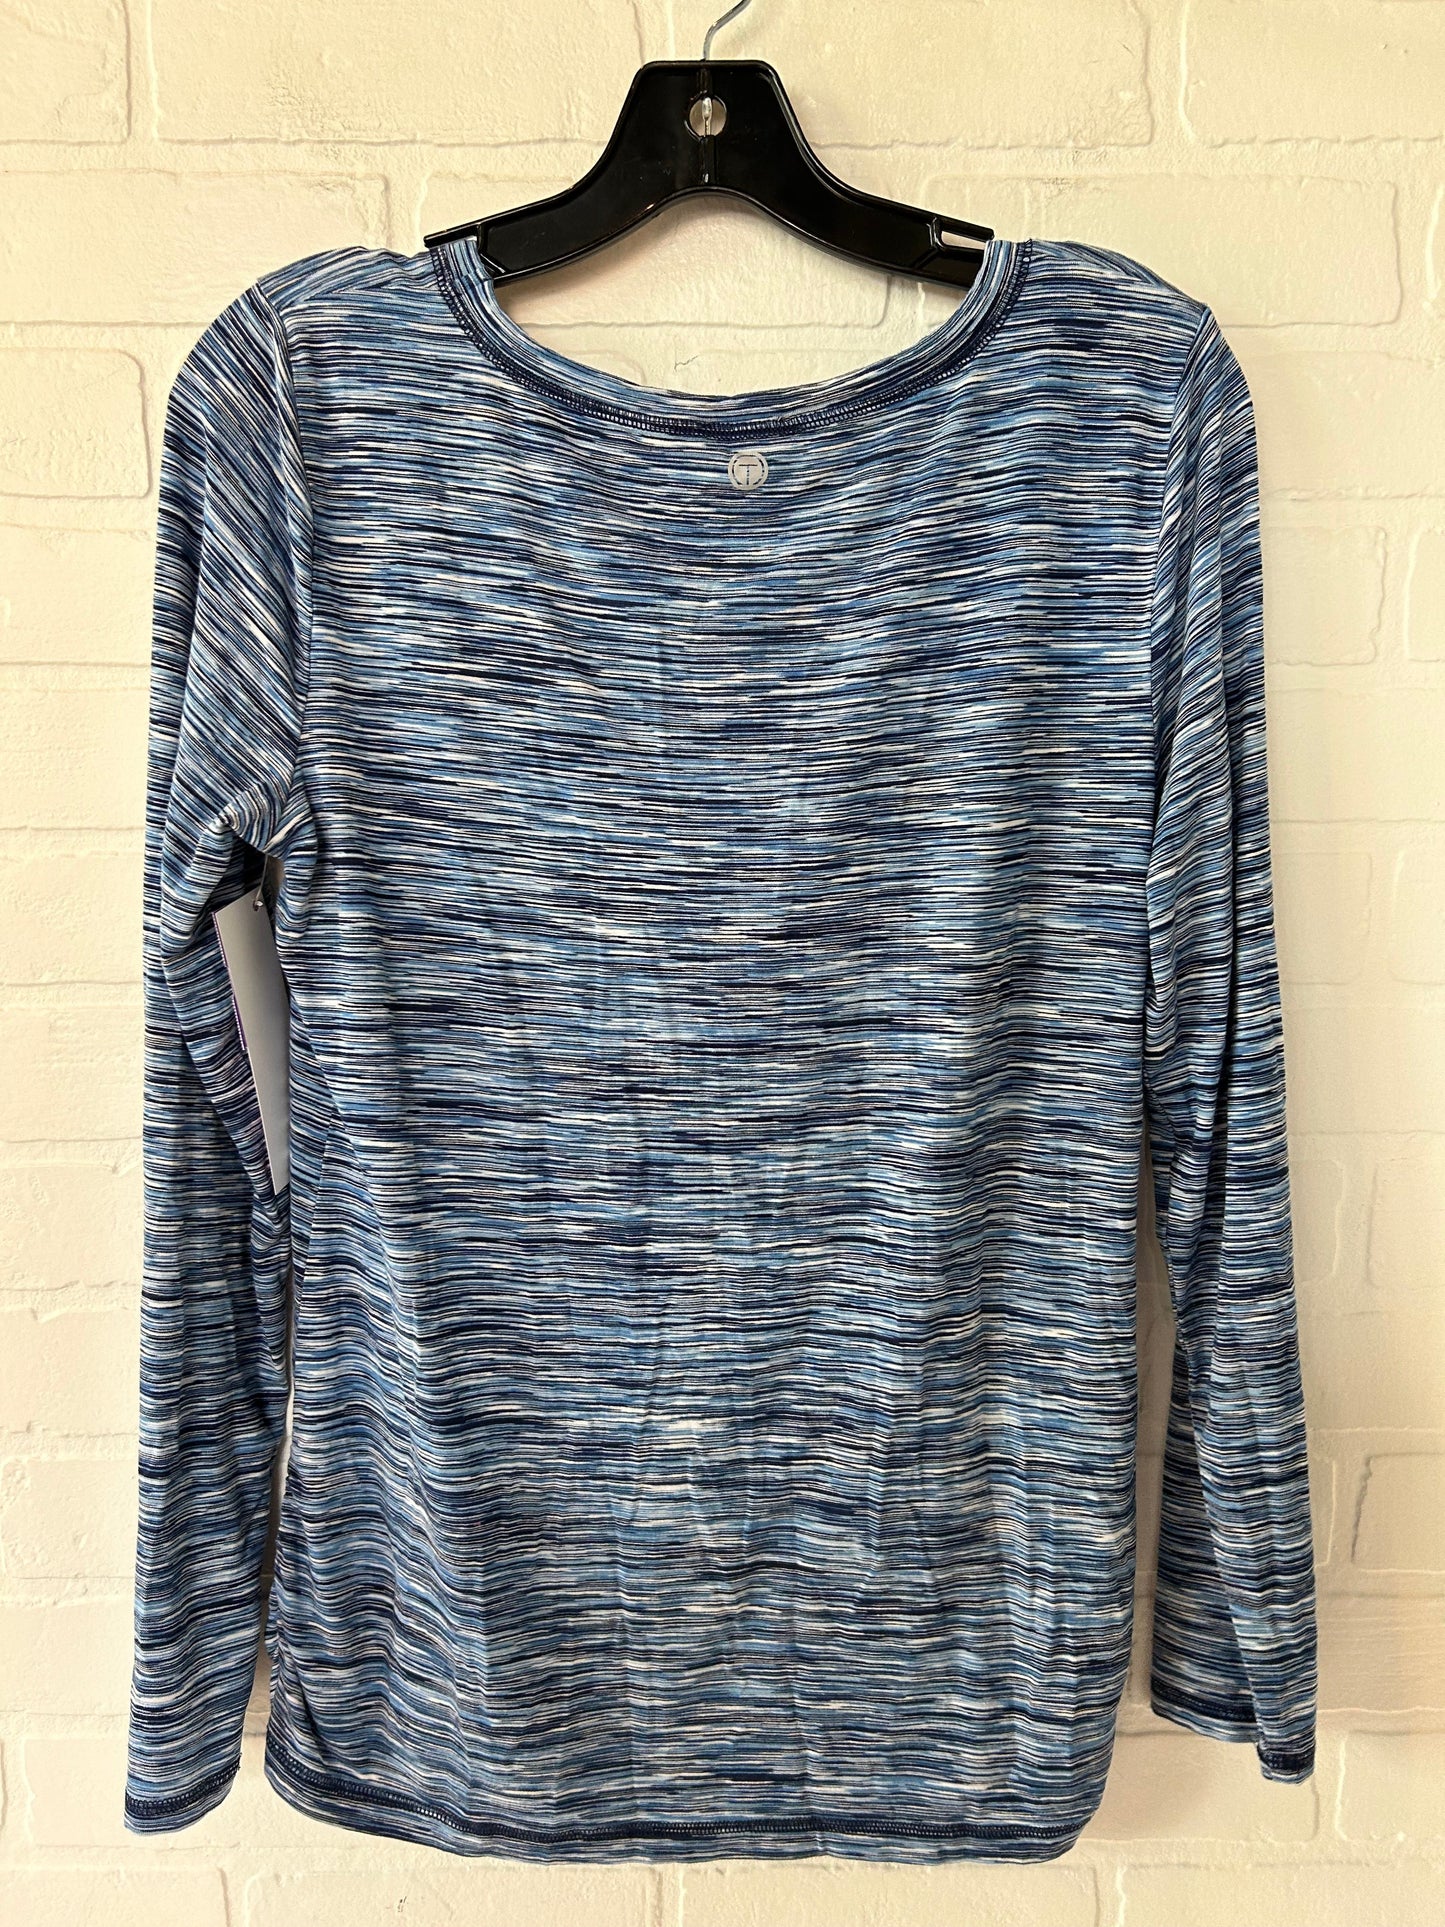 Athletic Top Long Sleeve Crewneck By Talbots  Size: M